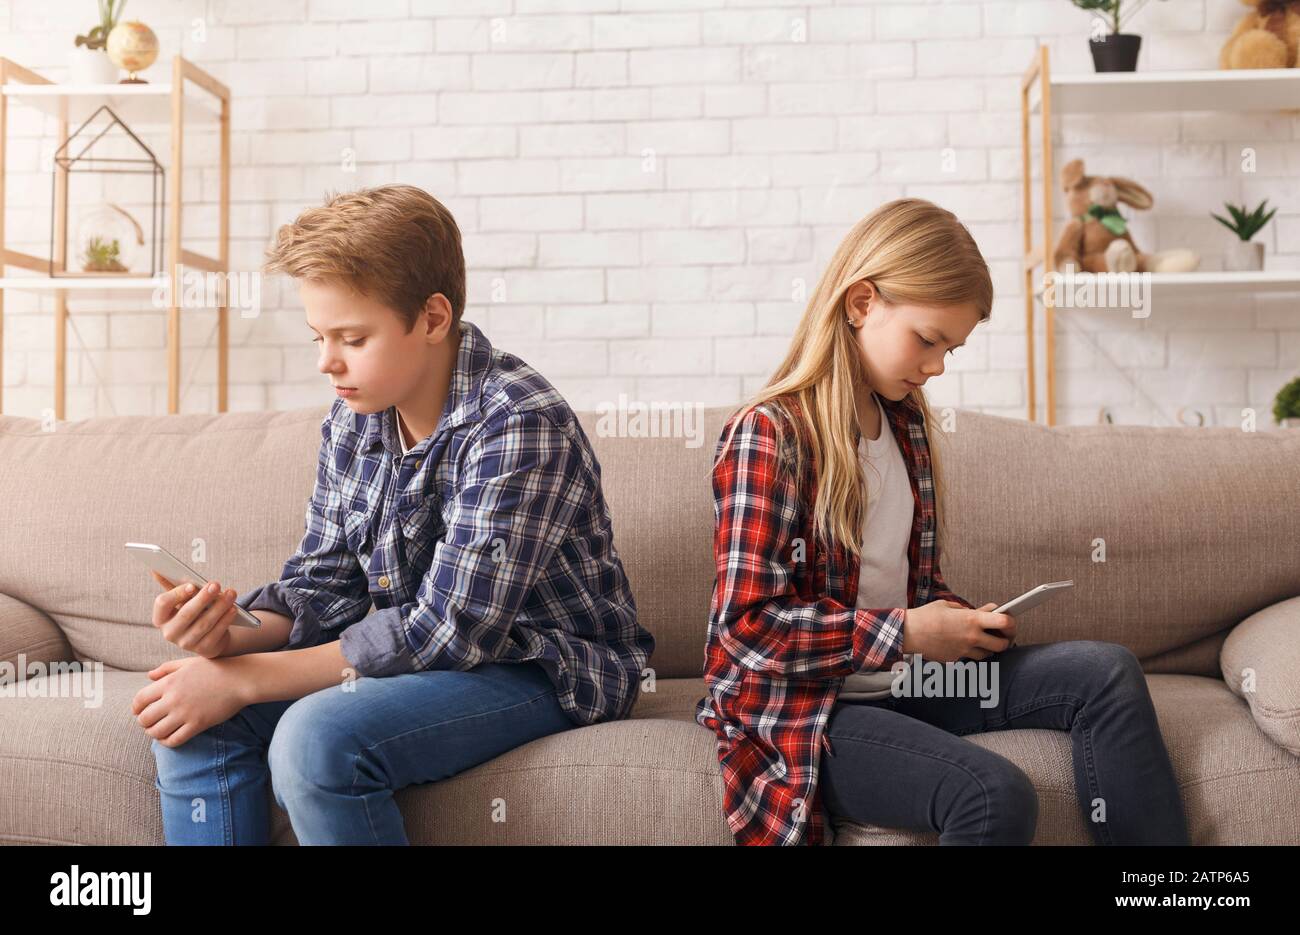 Brother And Sister Using Phones Sitting On Couch At Home Stock Photo